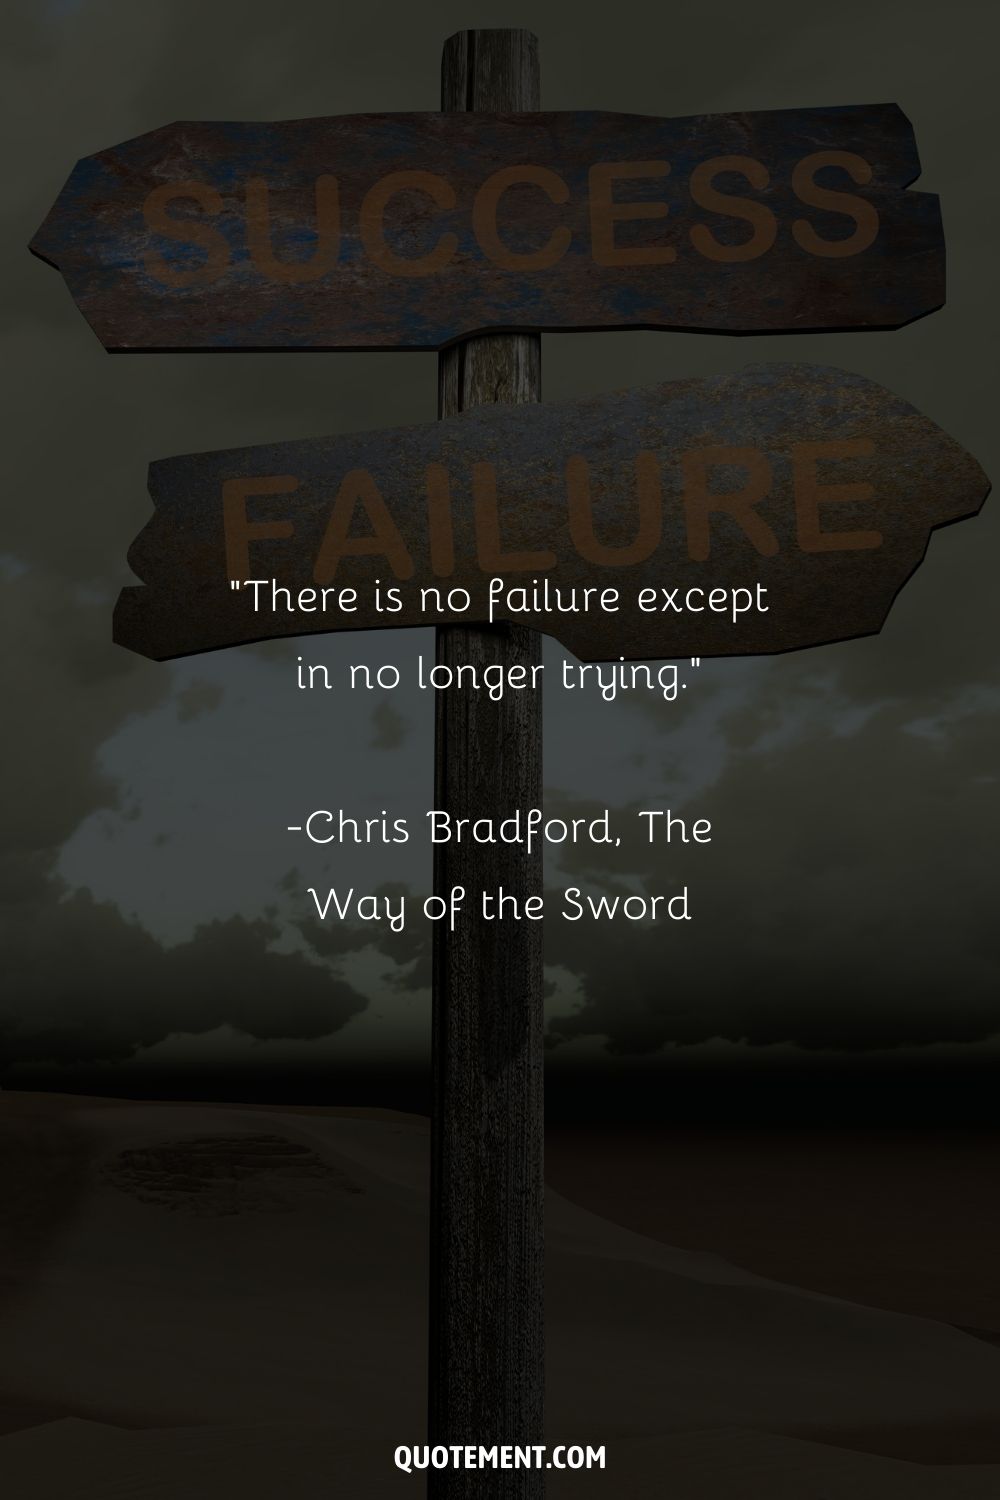 “There is no failure except in no longer trying.” ― Chris Bradford, The Way of the Sword